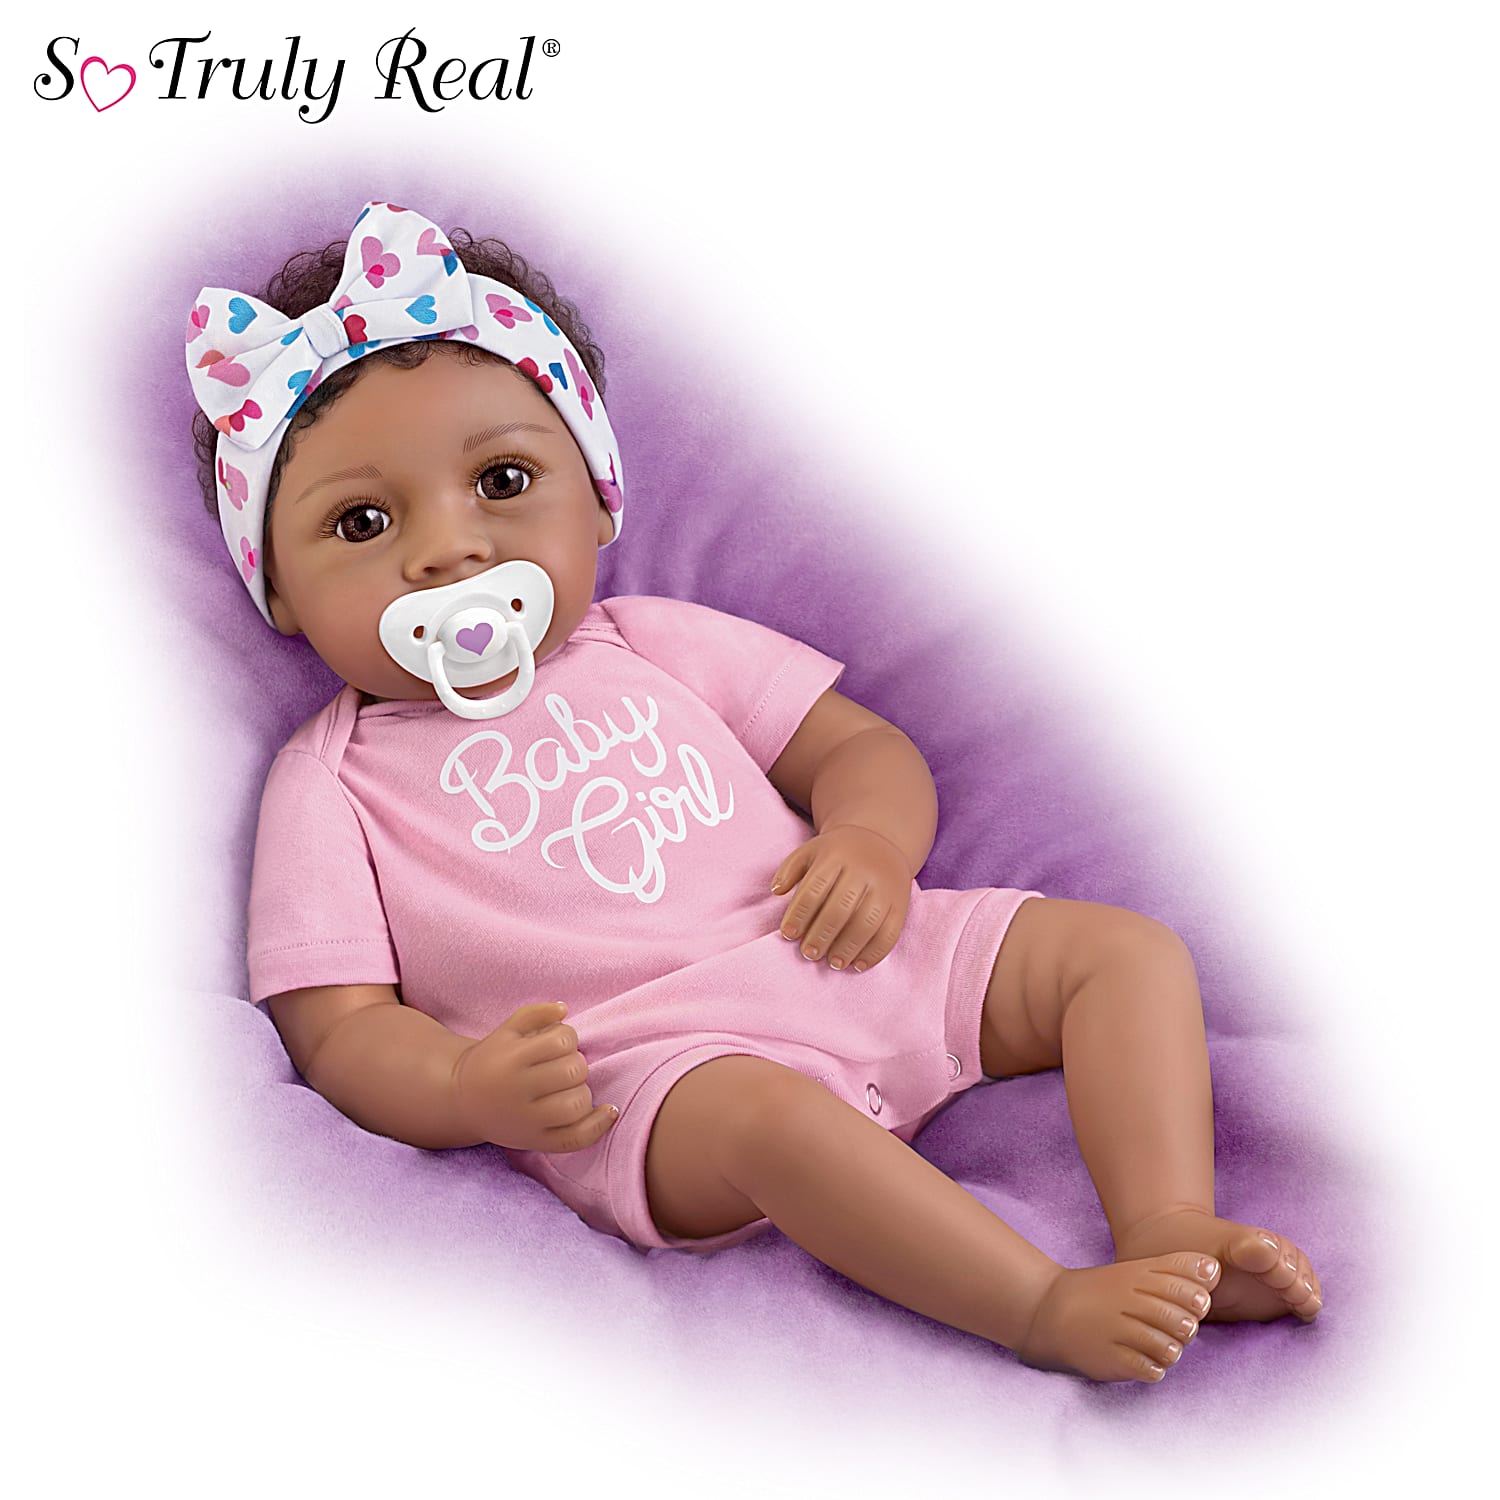 All-Vinyl Baby Doll Set - Play with a Purpose